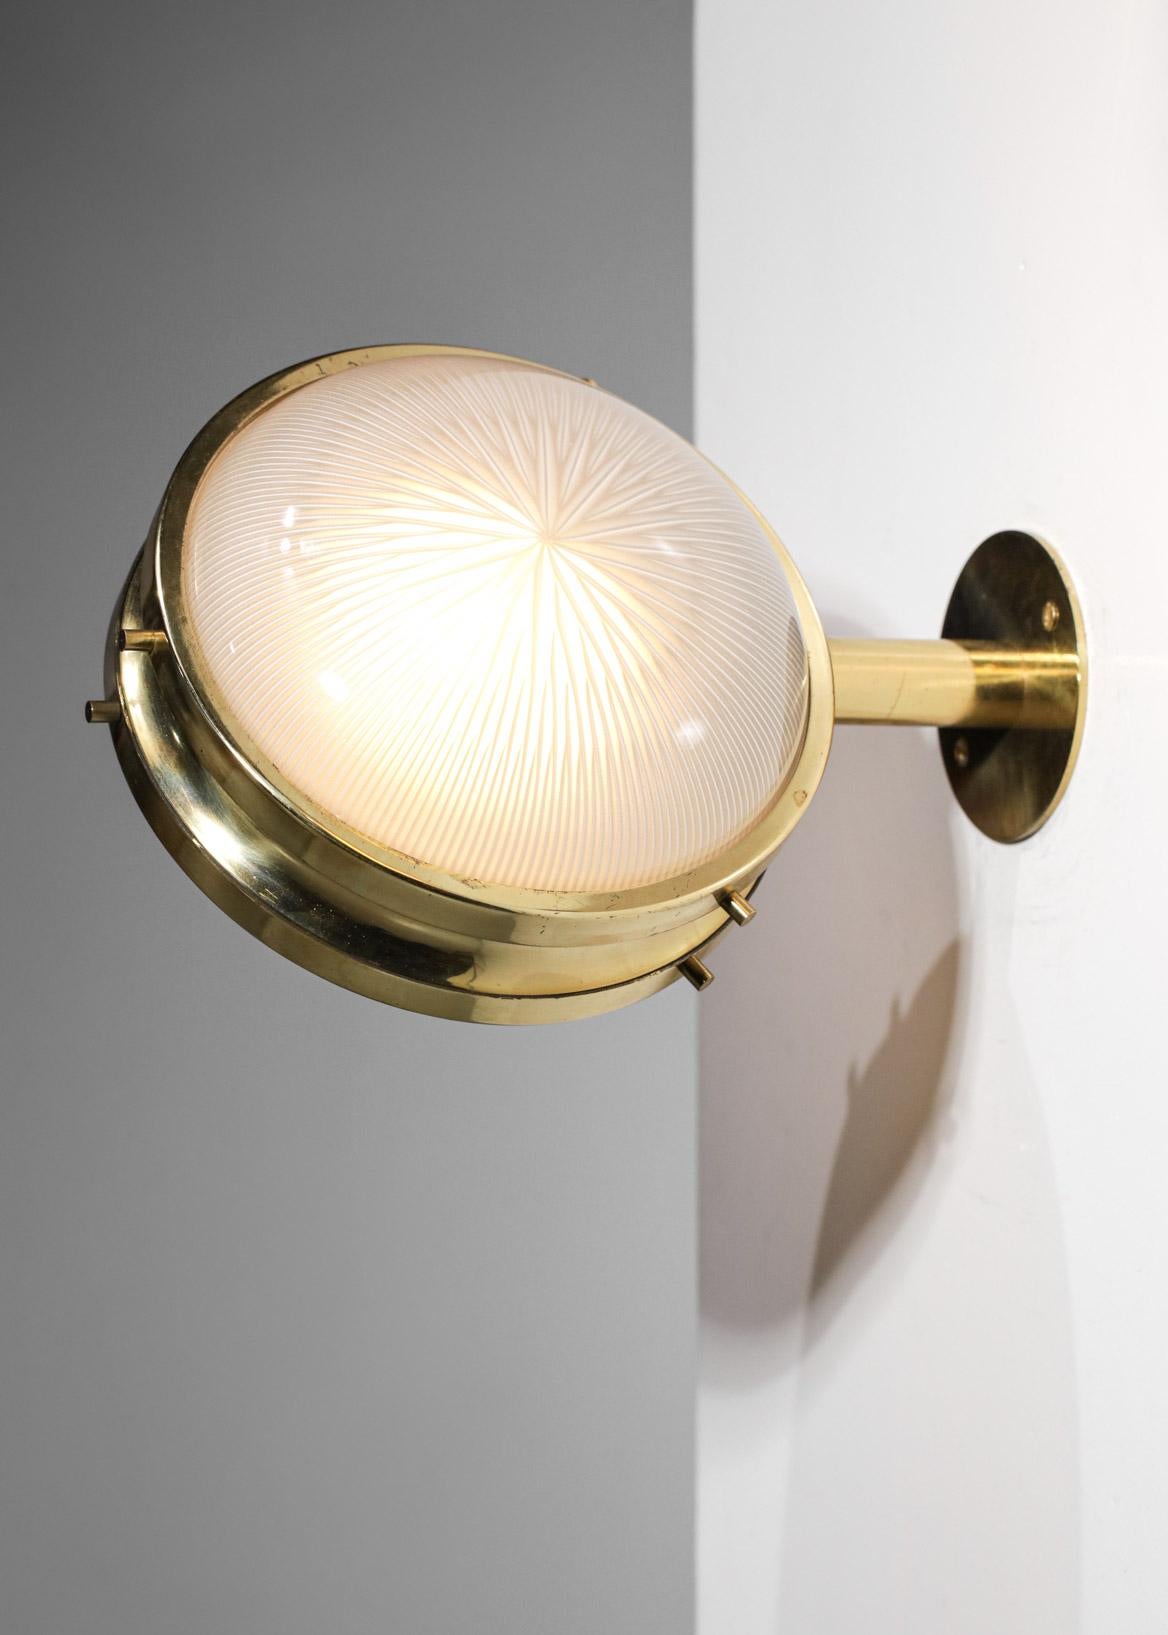 Mid-20th Century Pair of Italian Sergio Mazza Sconces Frosted Glass and Brass Wall Light, G148